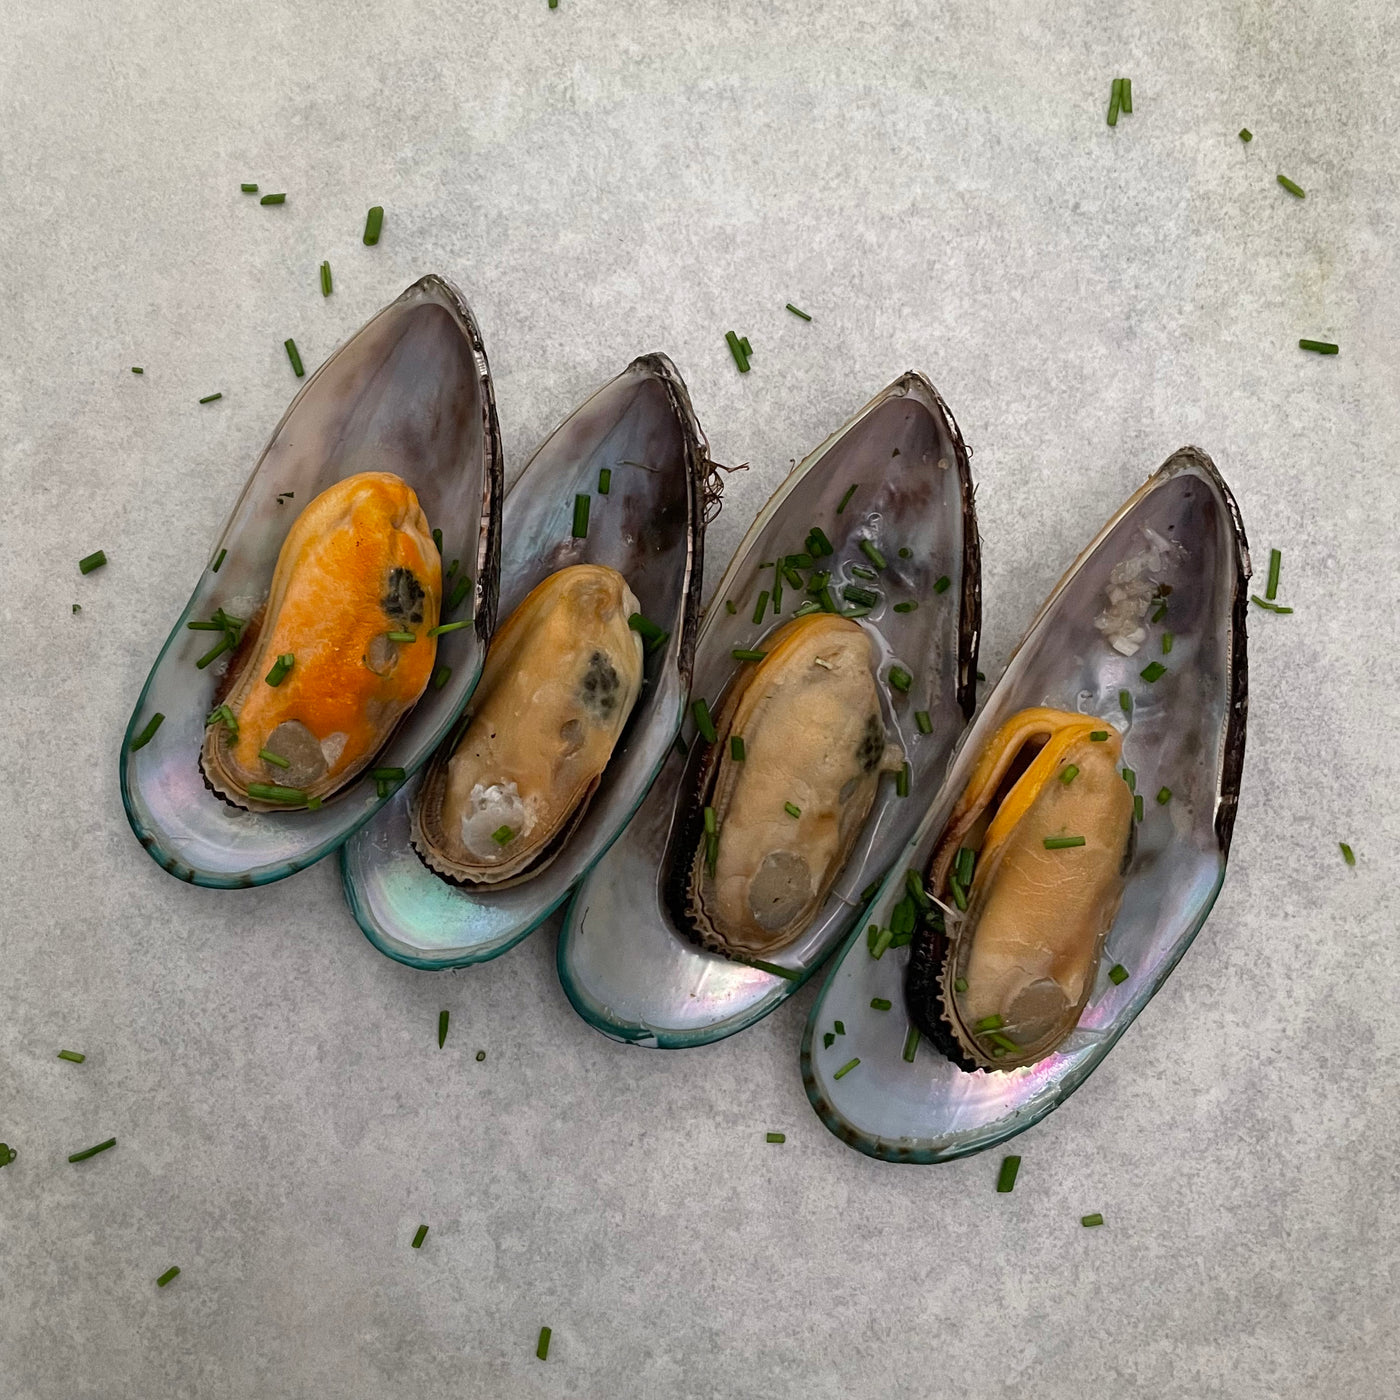 Greenlipped Mussels